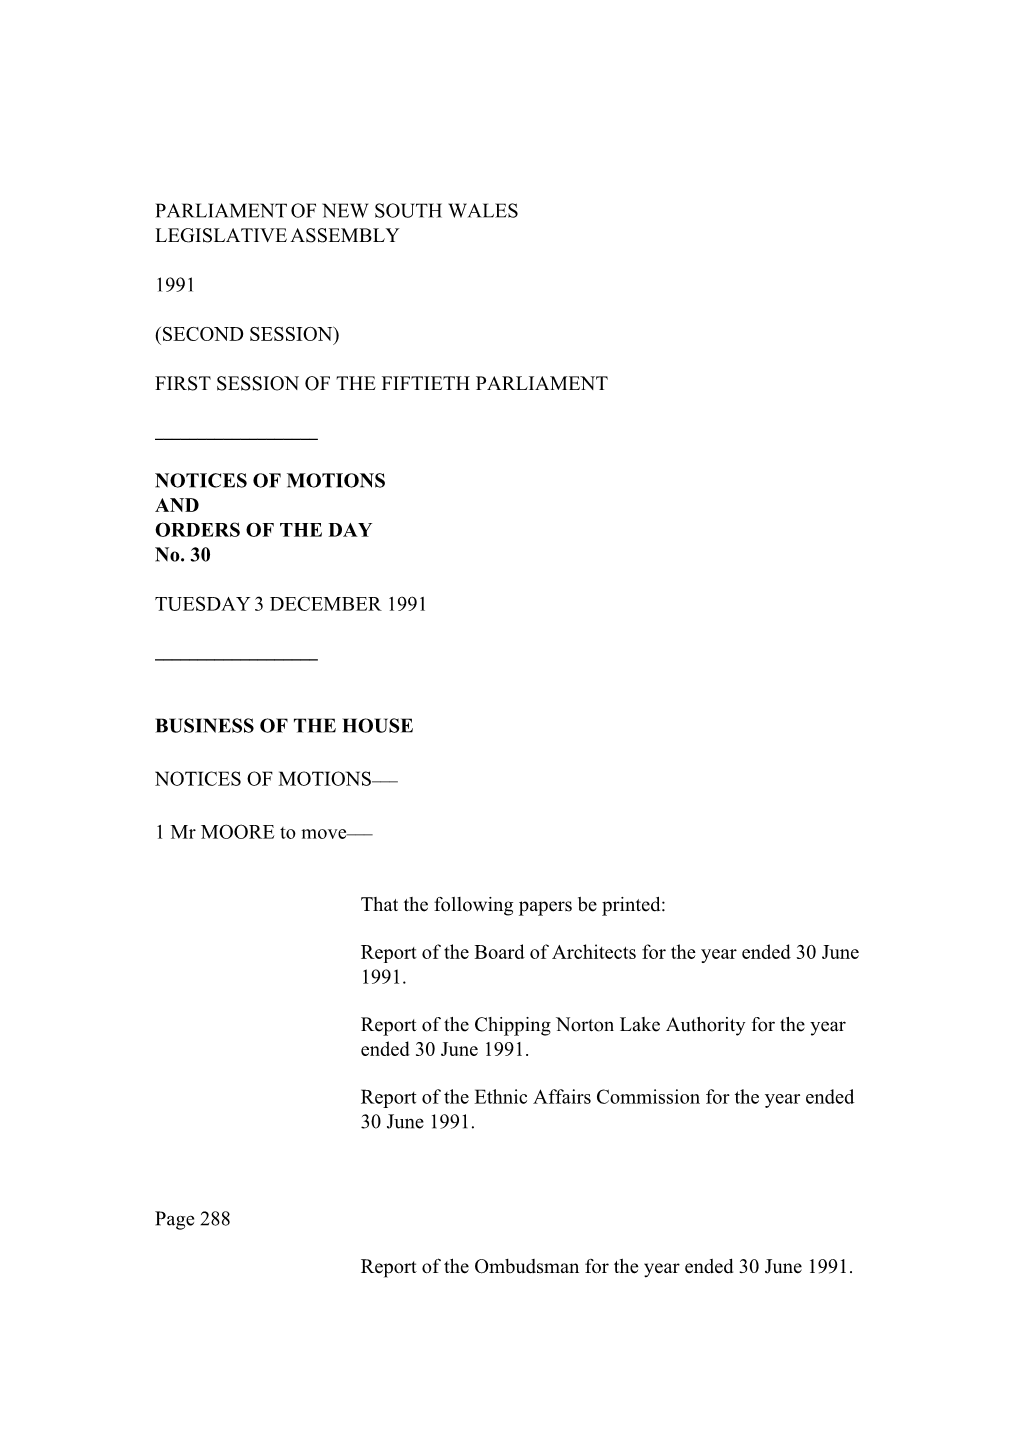 Notices of Motion No. 30